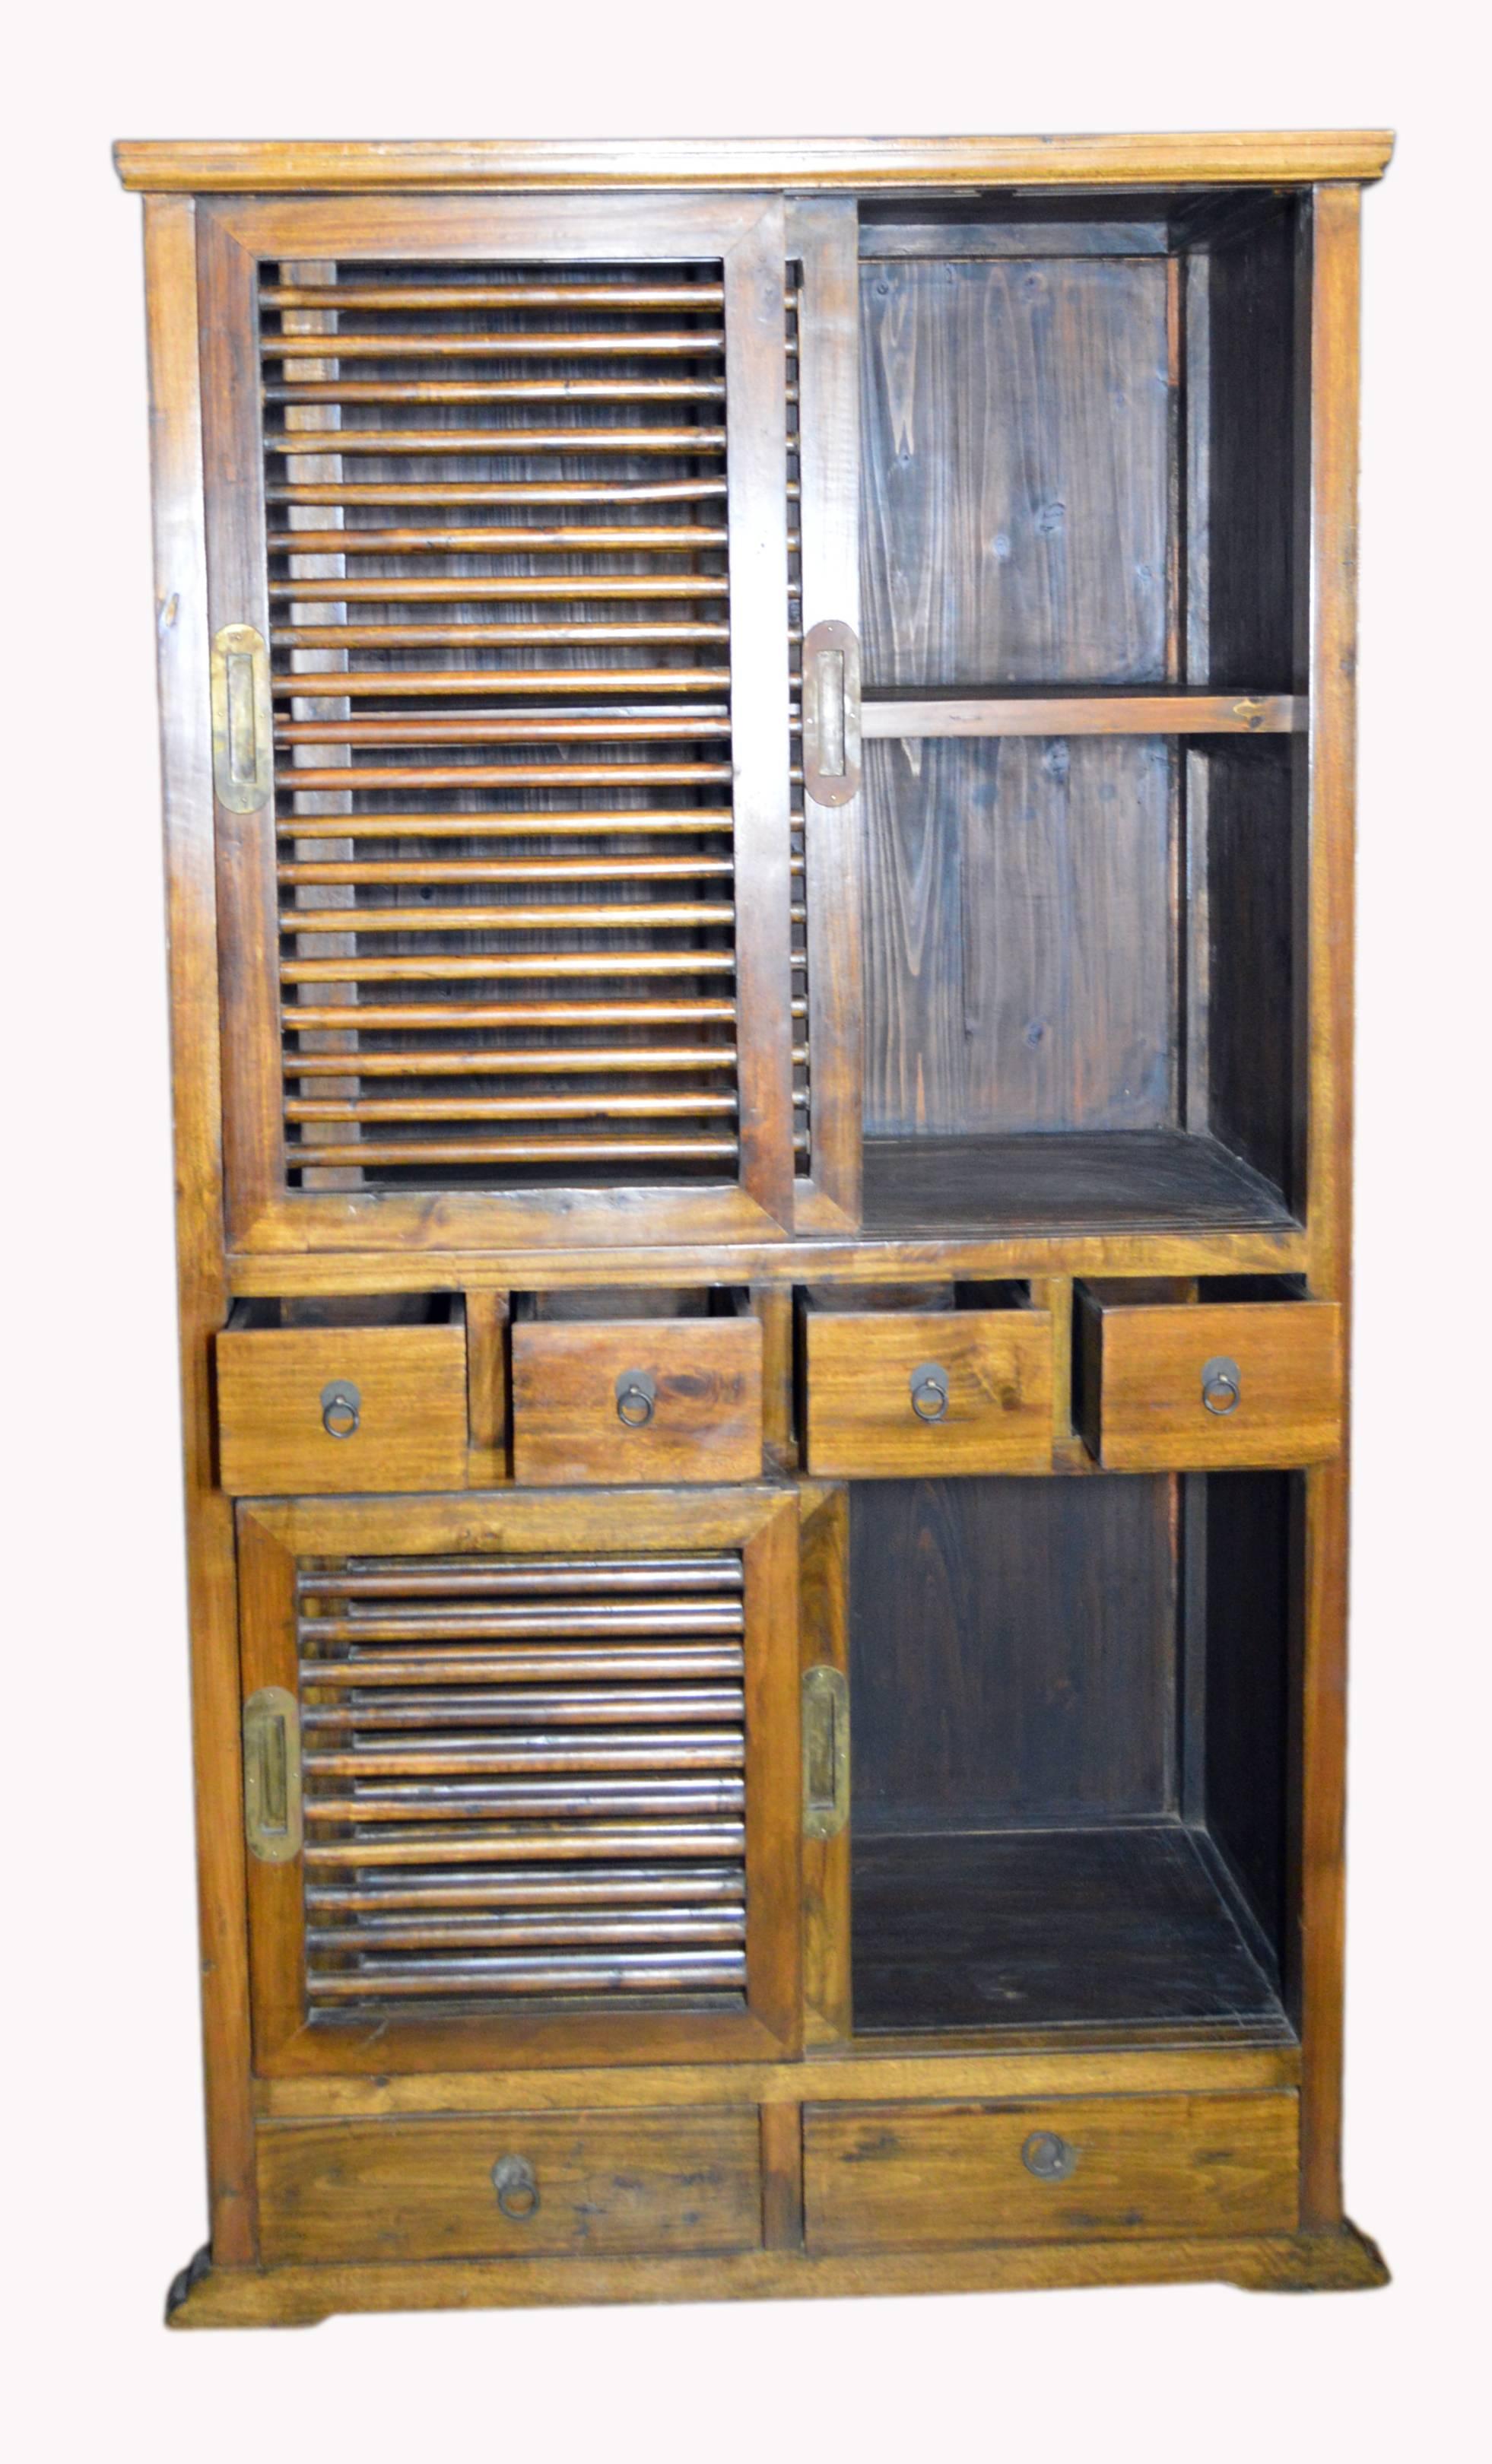 A tall 19th century Dutch Colonial Indonesian armoire with sliding doors, drawers, brass handles and natural patina. This unusual Dutch Colonial armoire features a thin molded cornice sitting above two fretwork sliding doors with brass handles.